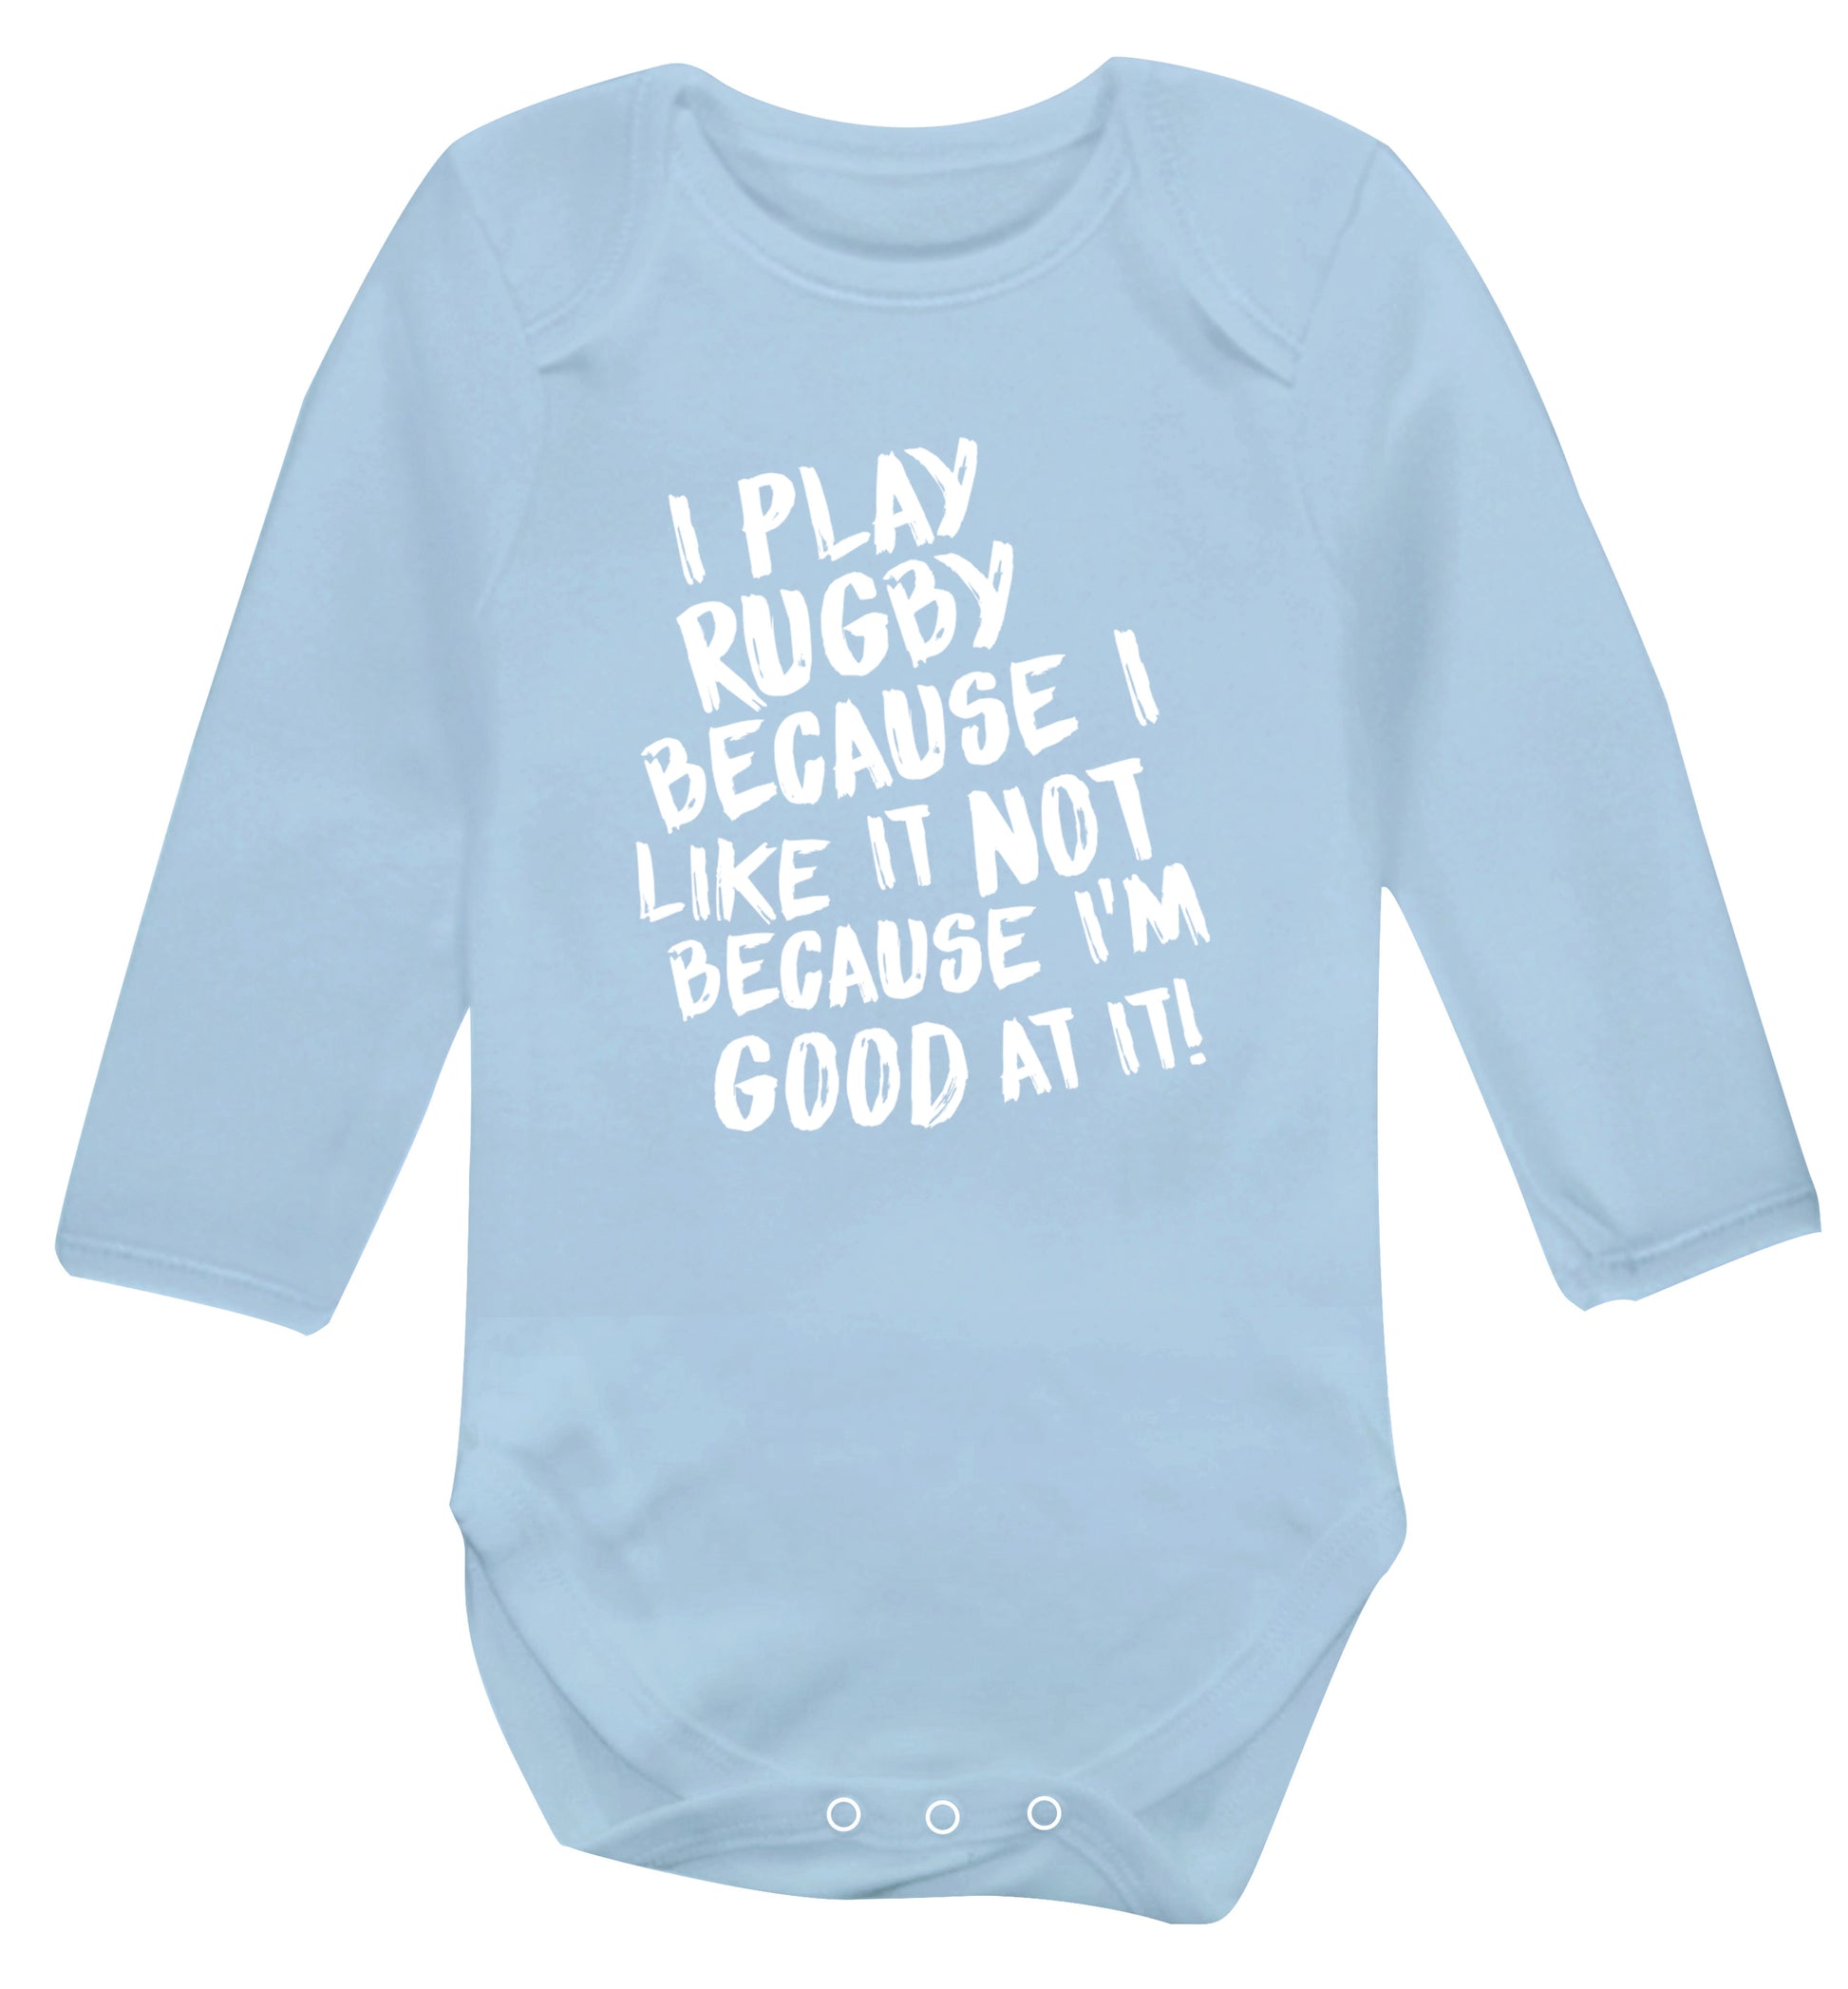 I play rugby because I like it not because I'm good at it Baby Vest long sleeved pale blue 6-12 months